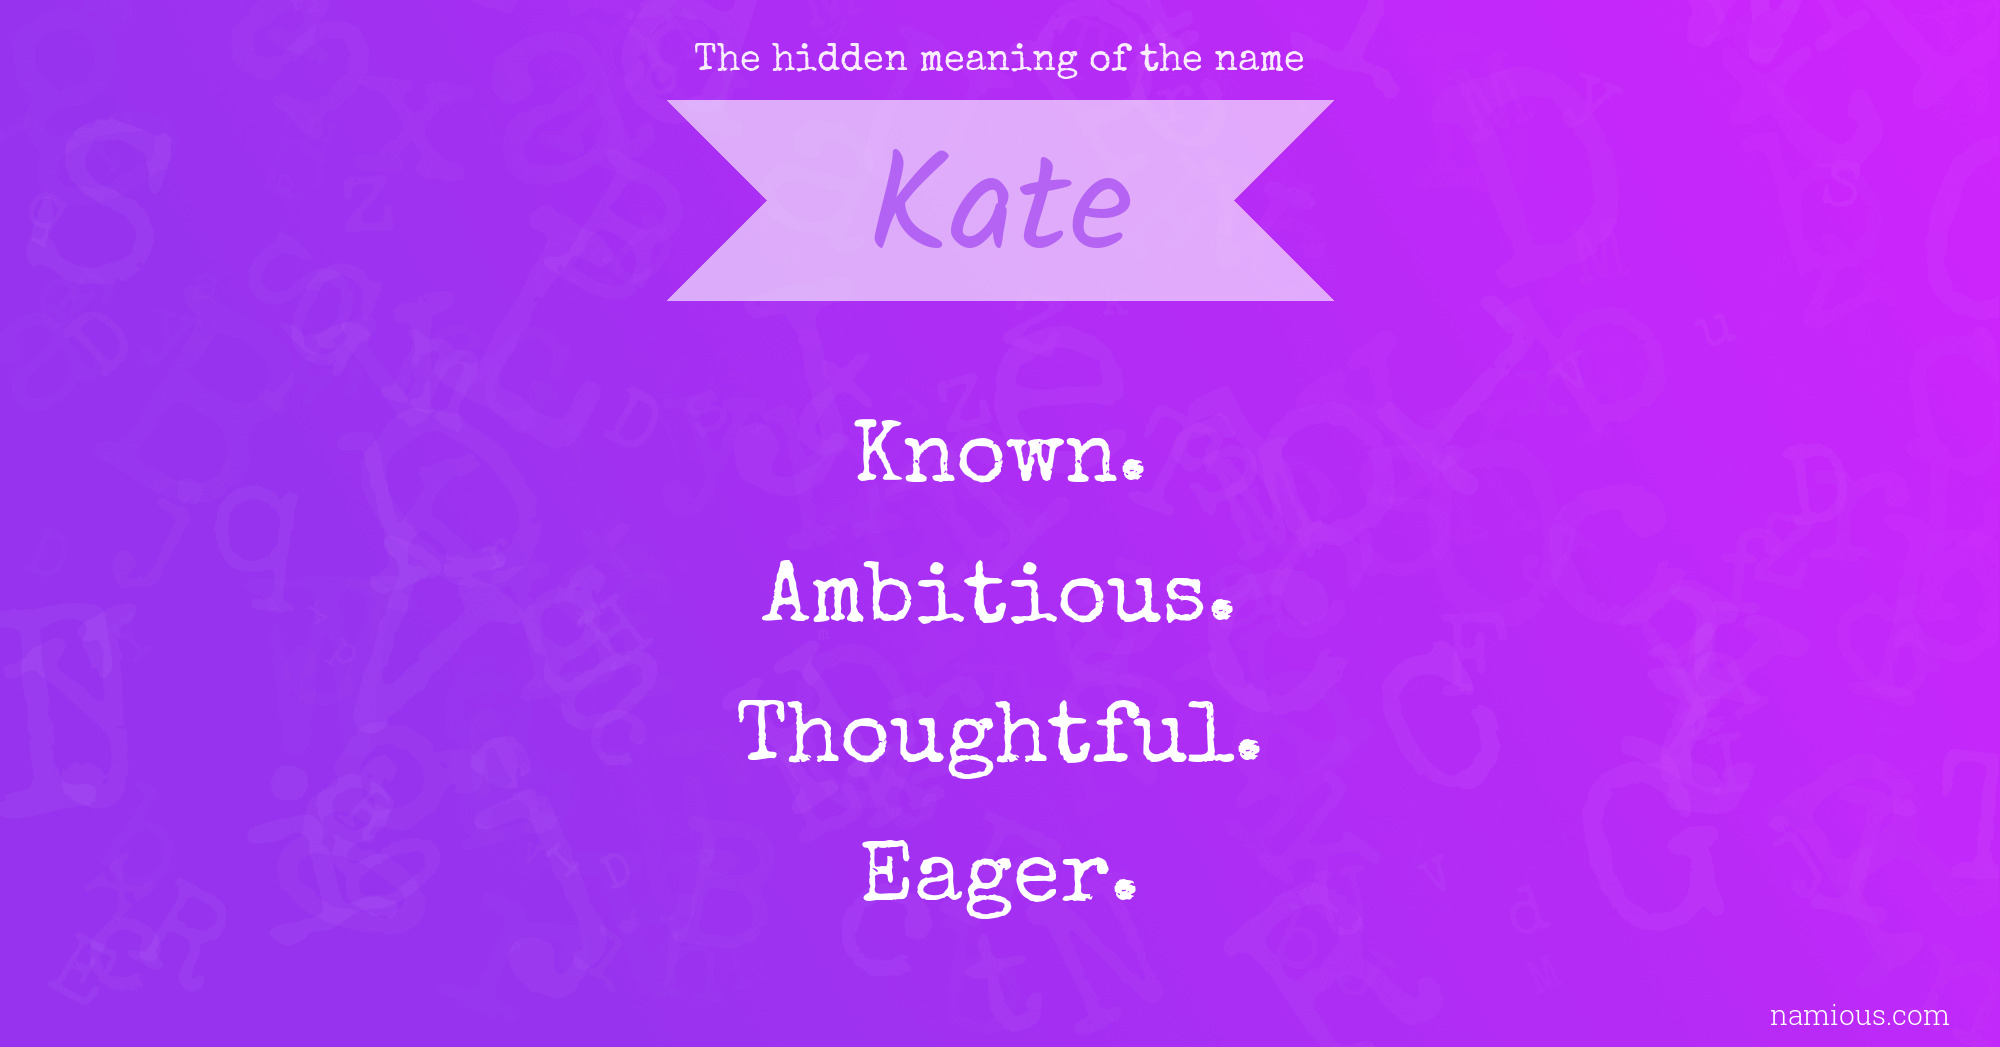 The hidden meaning of the name Kate